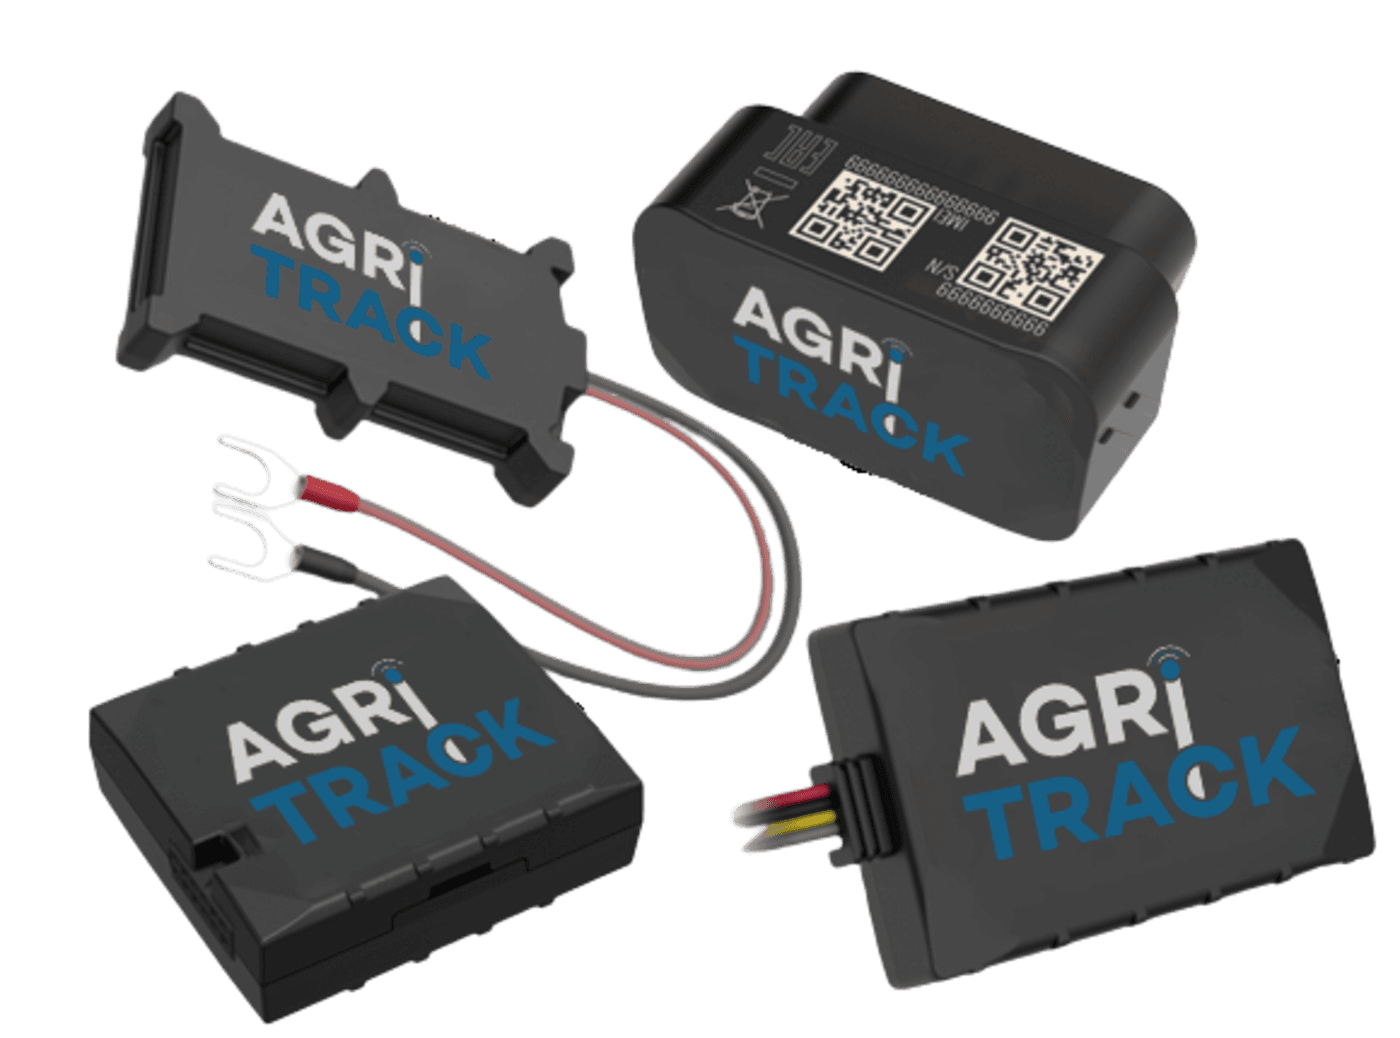 AgriTrack Trackers